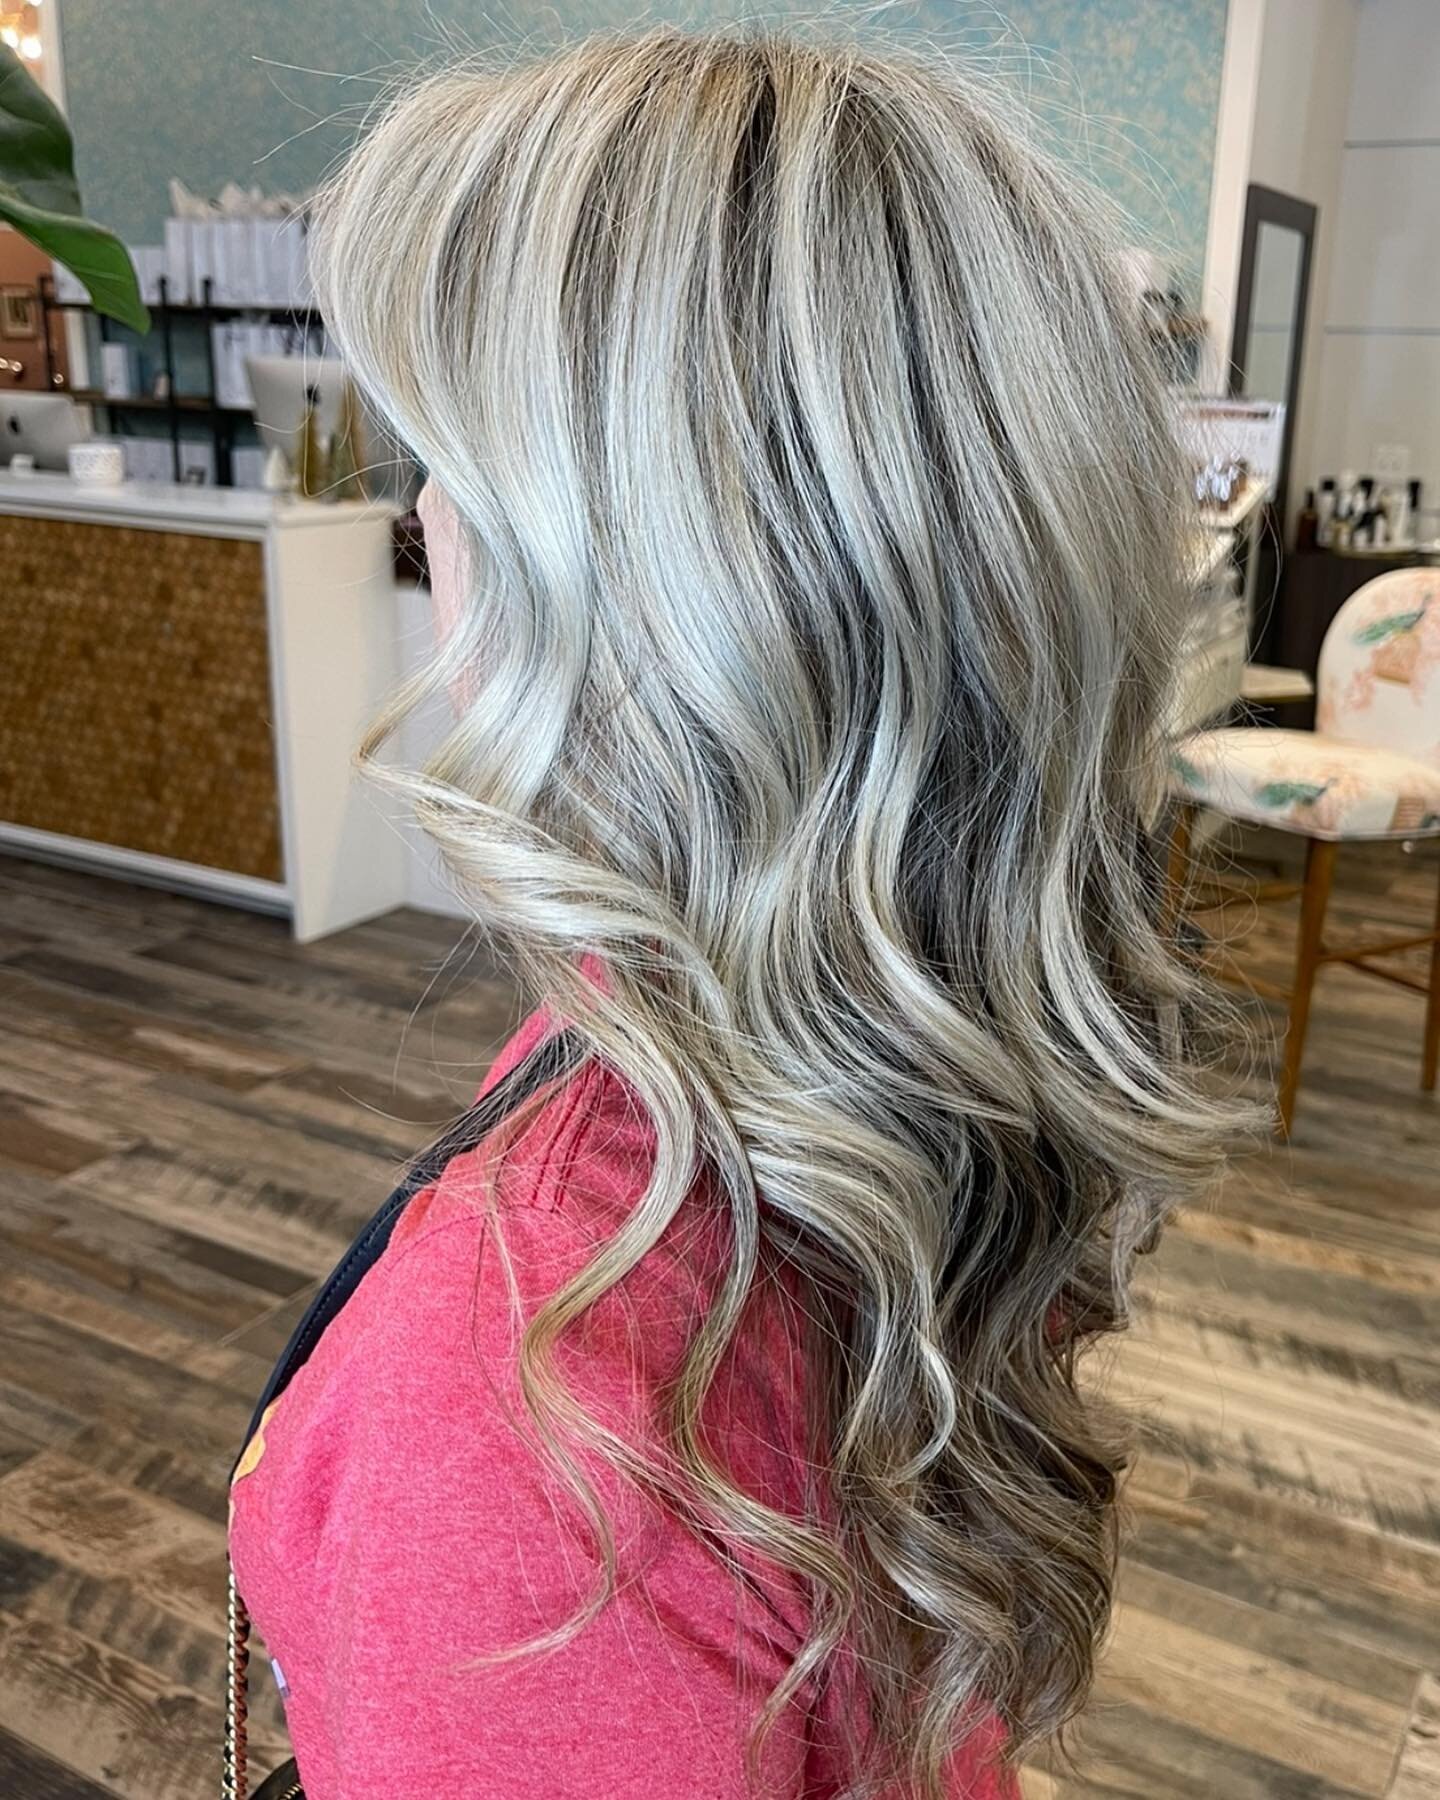 Ice queen vibes❄️
Highlight by Lexie @lexieloxx 
&mdash;&gt;Swipe for before!
&bull;
&bull;
Book online 24/7 or DM for a consult.
&bull;
&bull;
&bull;
&bull;
#blondehair #blonde #blondebalayage #foilayage #iceyblonde #ashblonde #austintexas #austintx